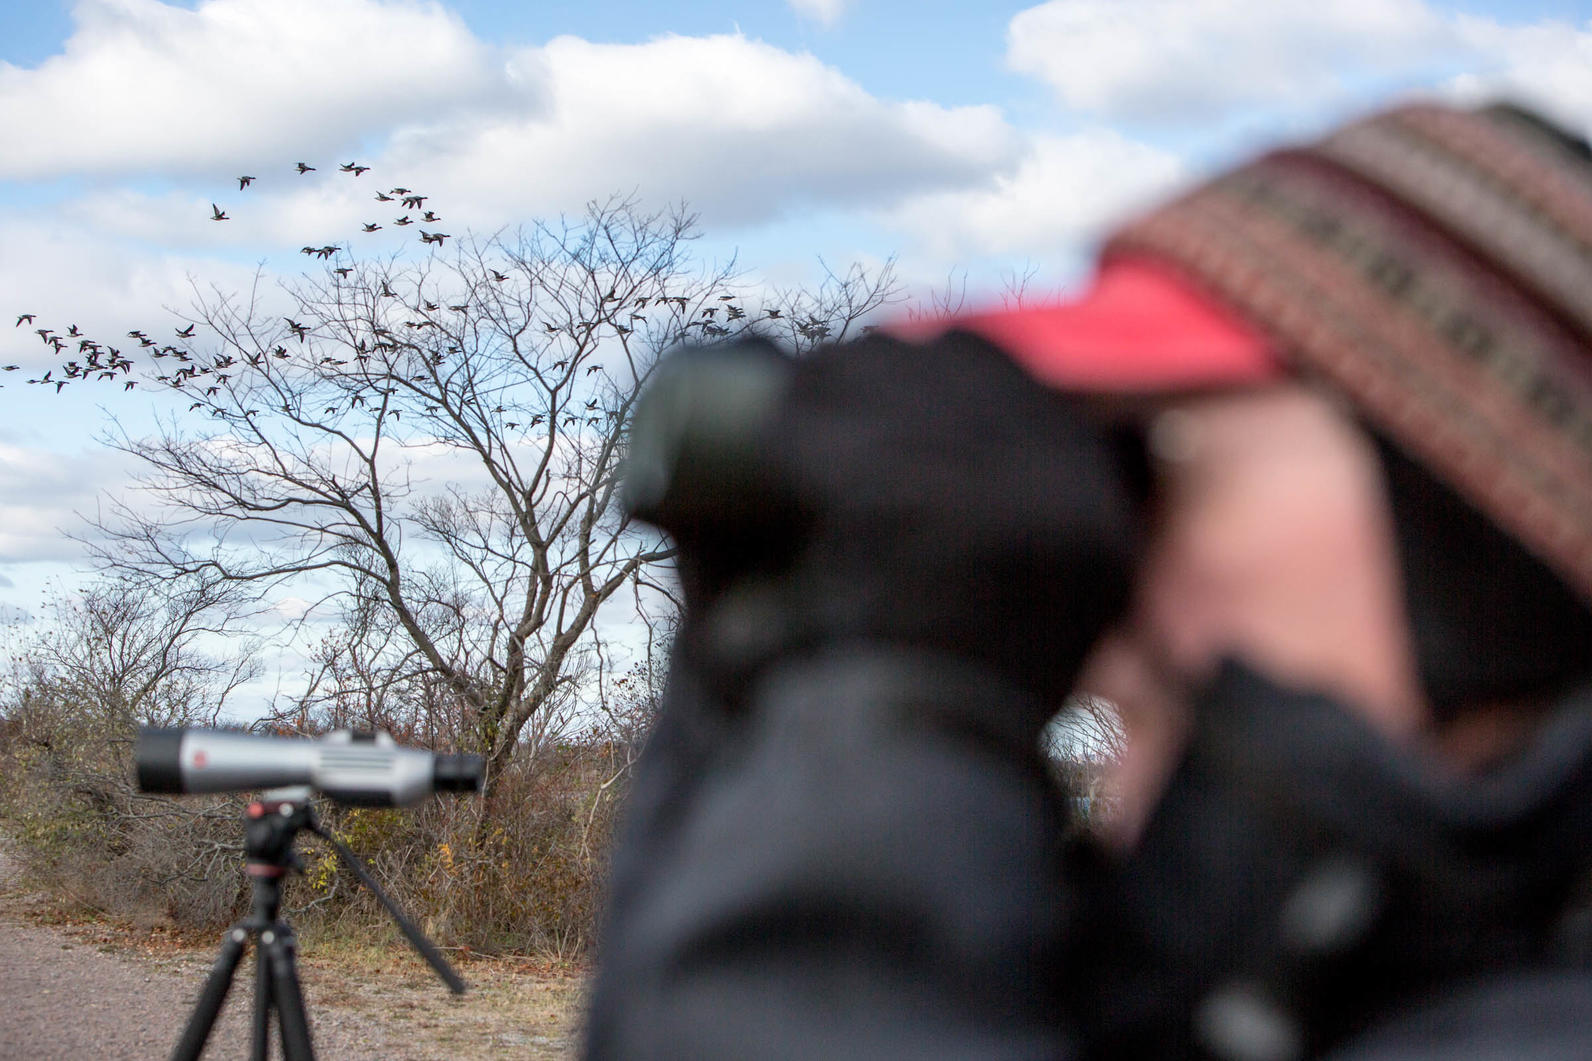 Birdwatching 101: The Ultimate Guide To Get Started